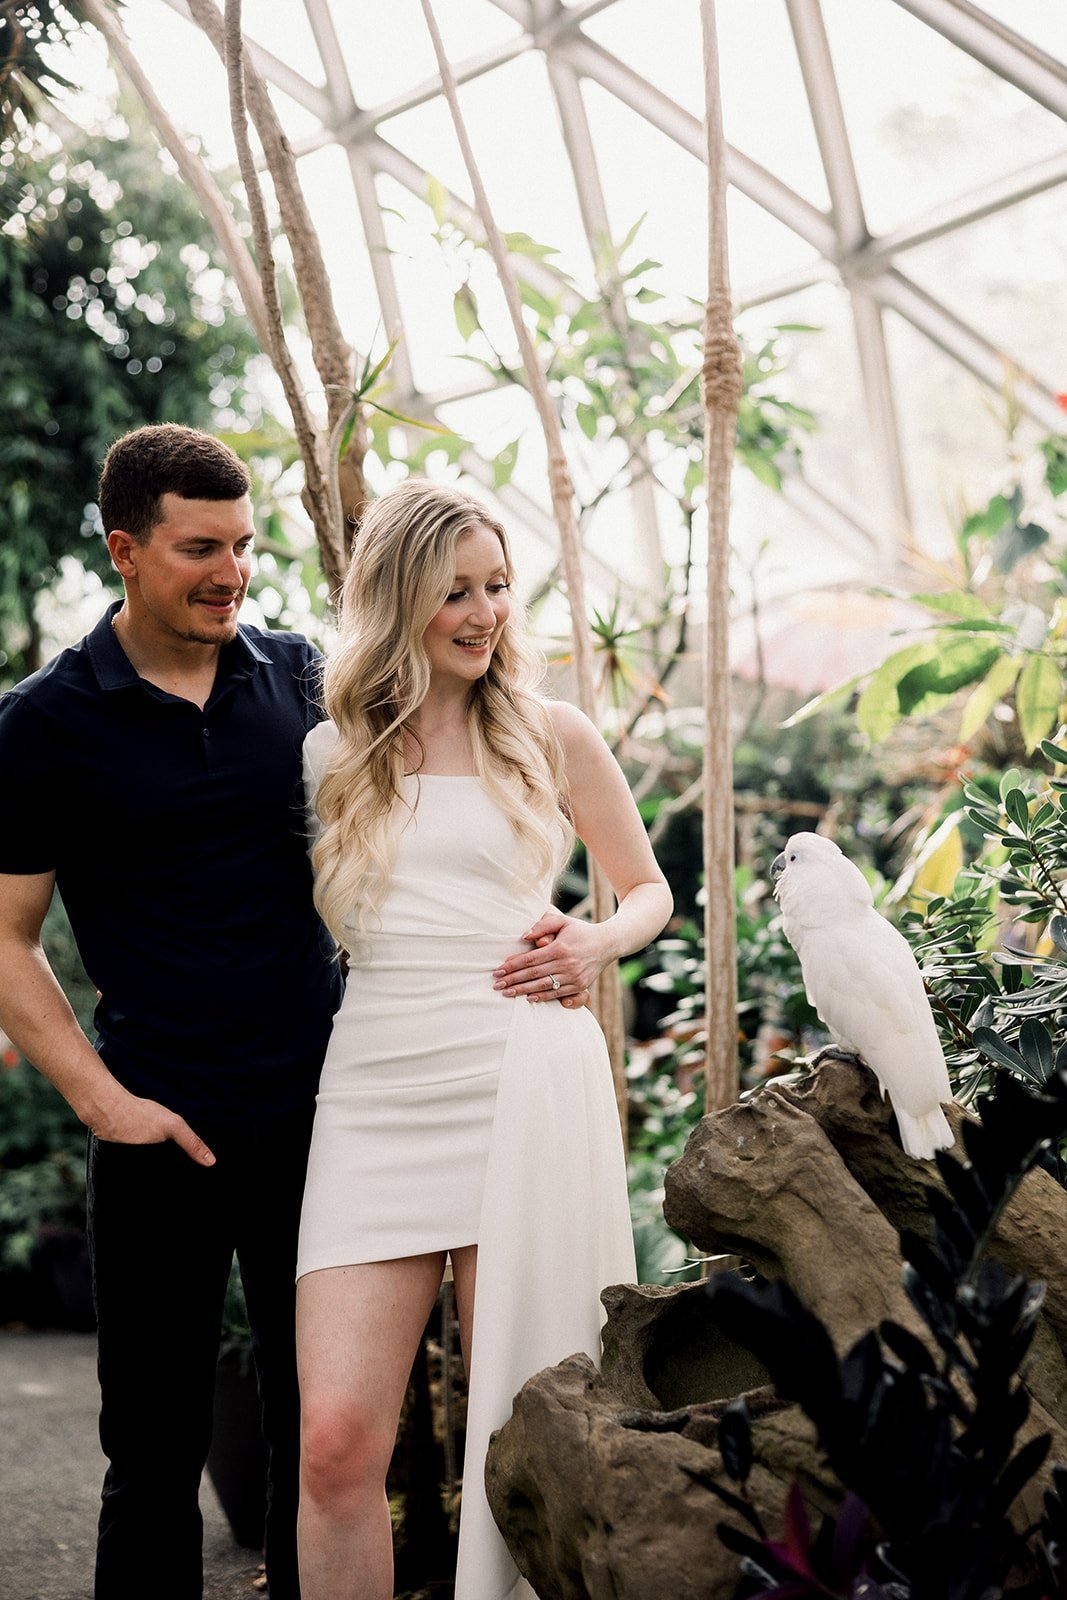 Man and woman engagement shoot with cockatoo at Bloedel Conservatory Vancouver, BC